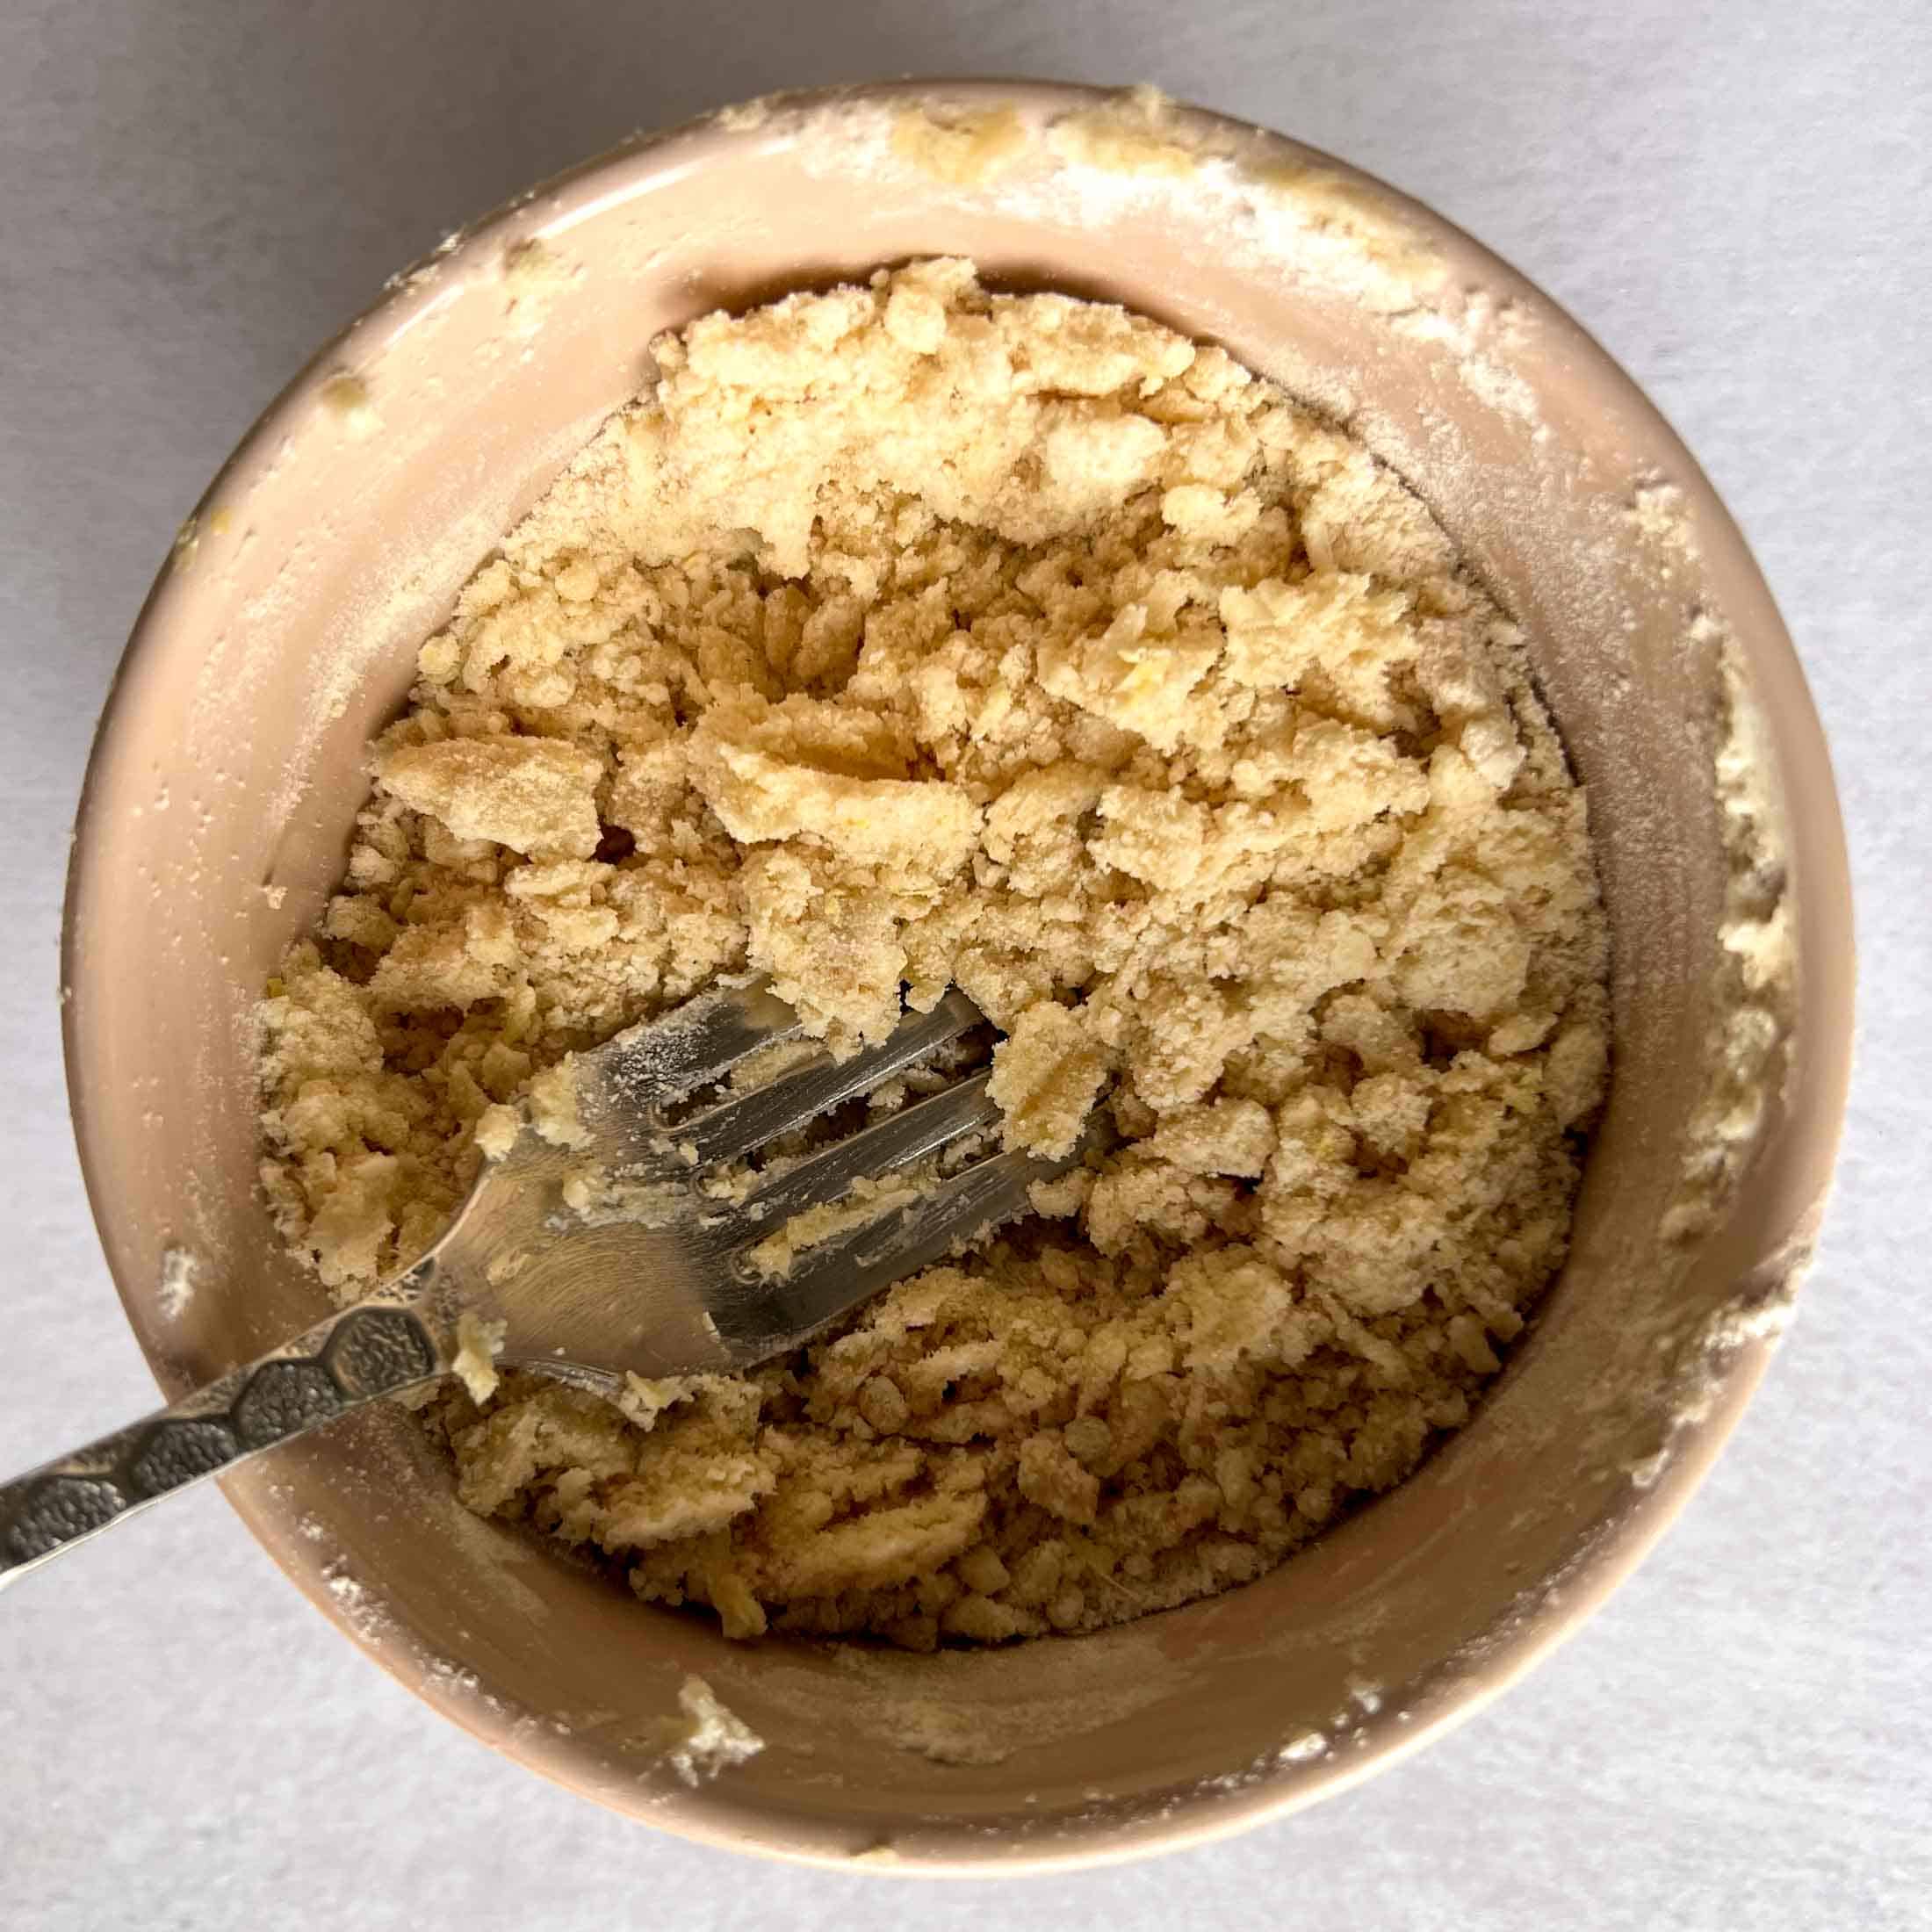 Mixed streusel topping with a fork in a bowl.